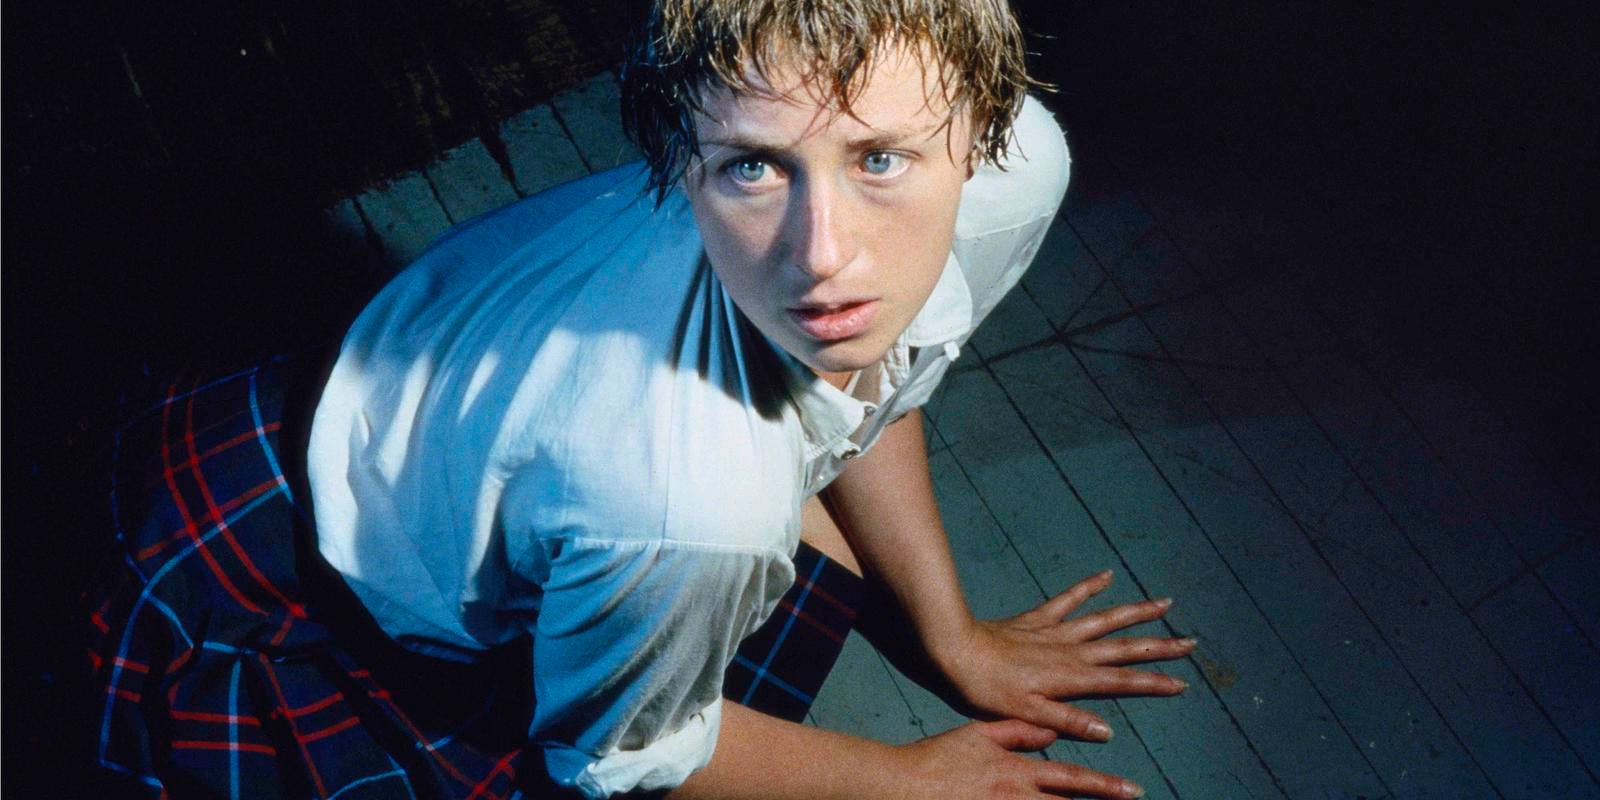 Cindy Sherman

Untitled #92

1981

chromogenic color print

24 x 48 inches (61 x 121.9 cm)

Edition of 10